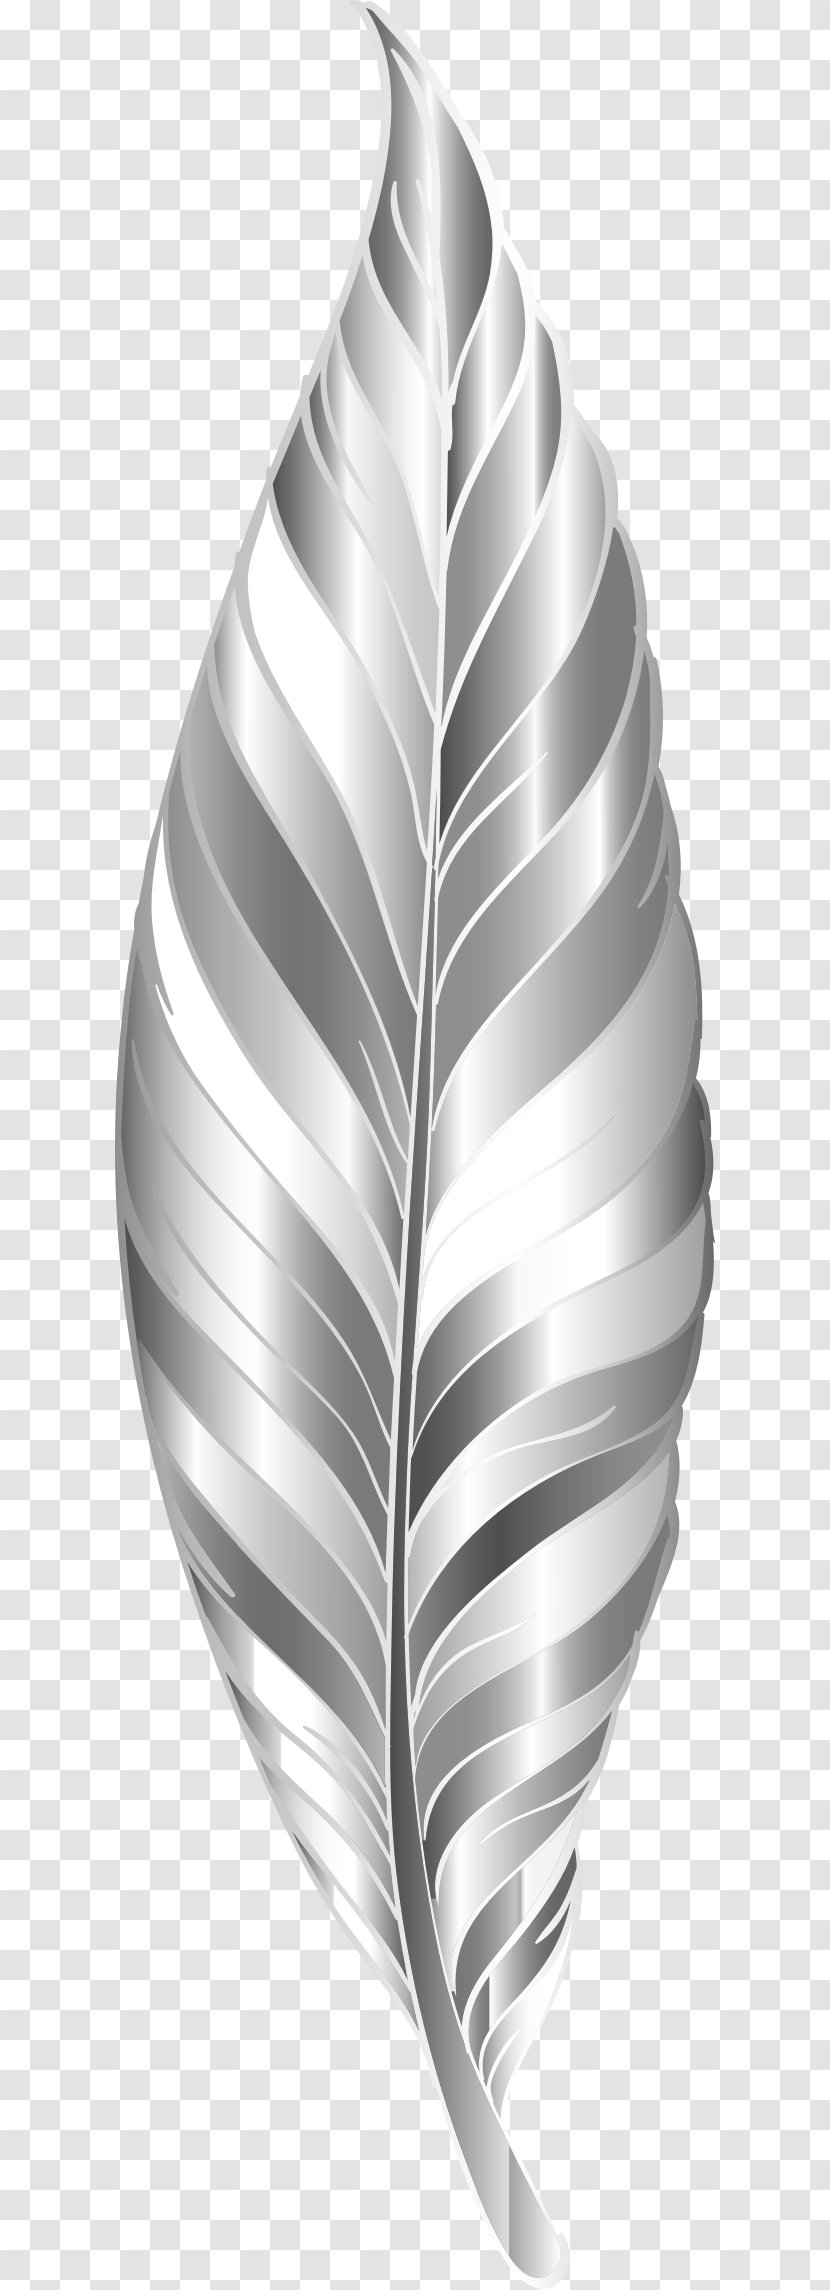 Clip Art - Search Box - Feather Transparent PNG